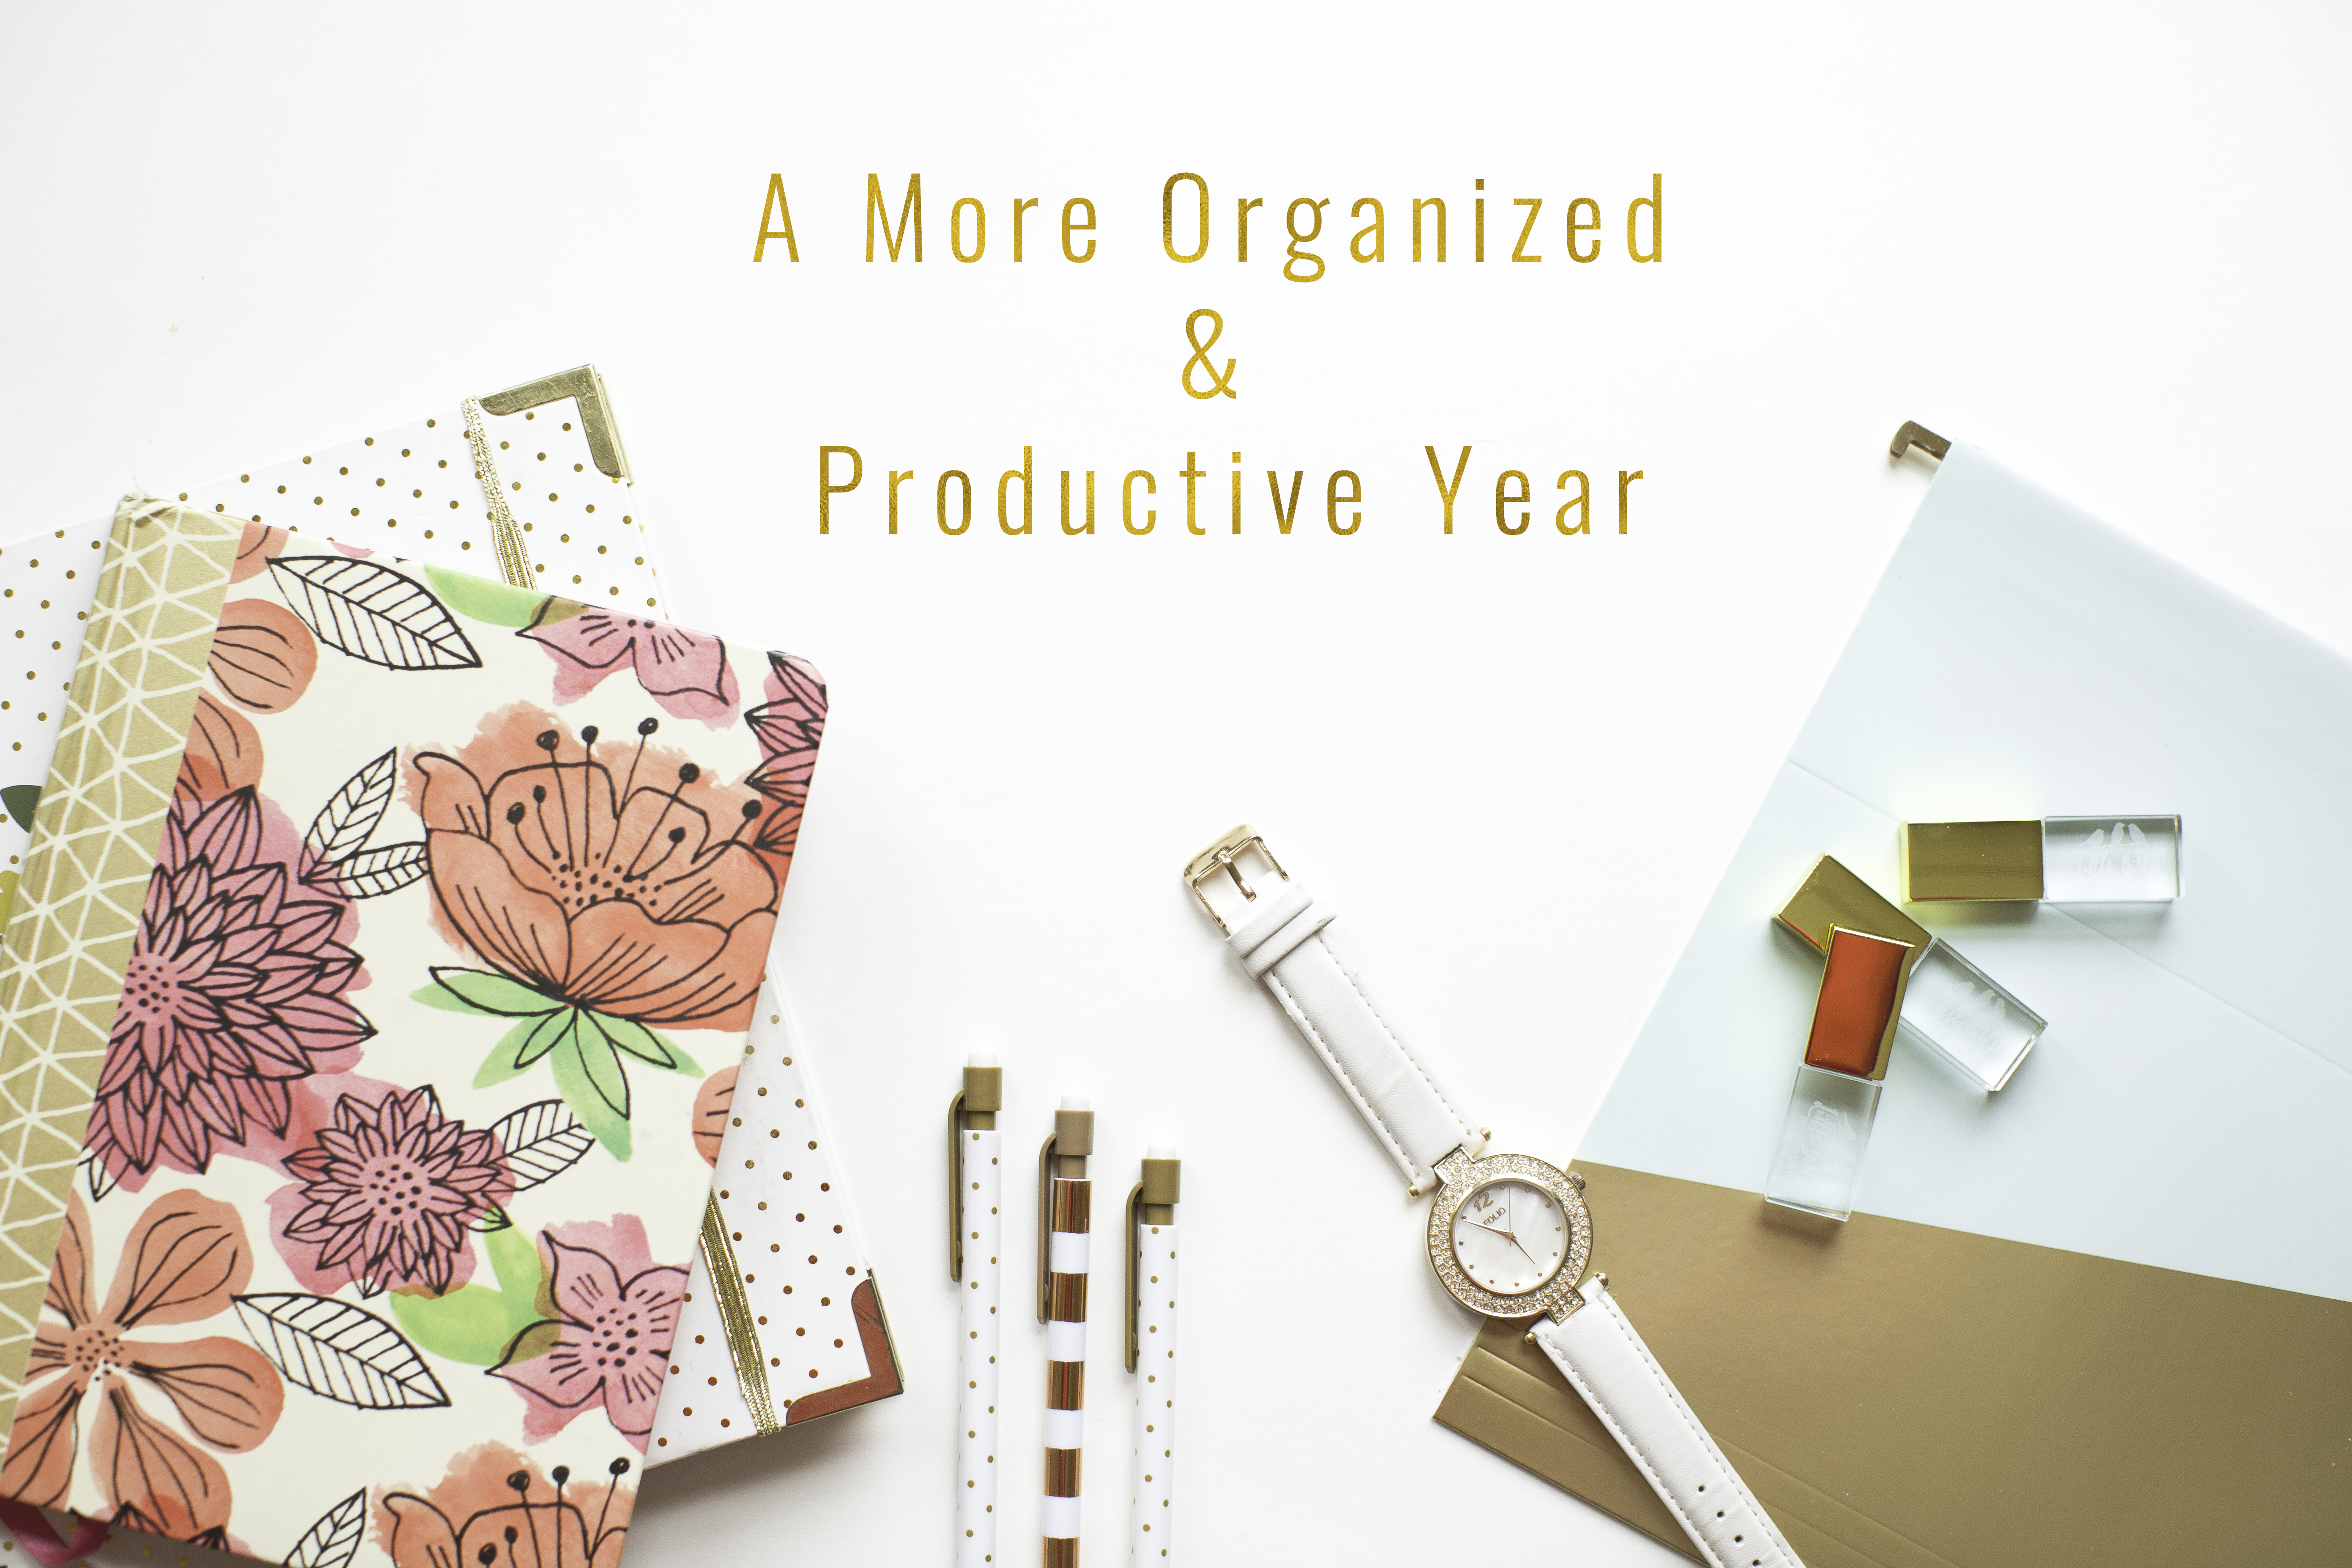 A more Organized & Productive Year